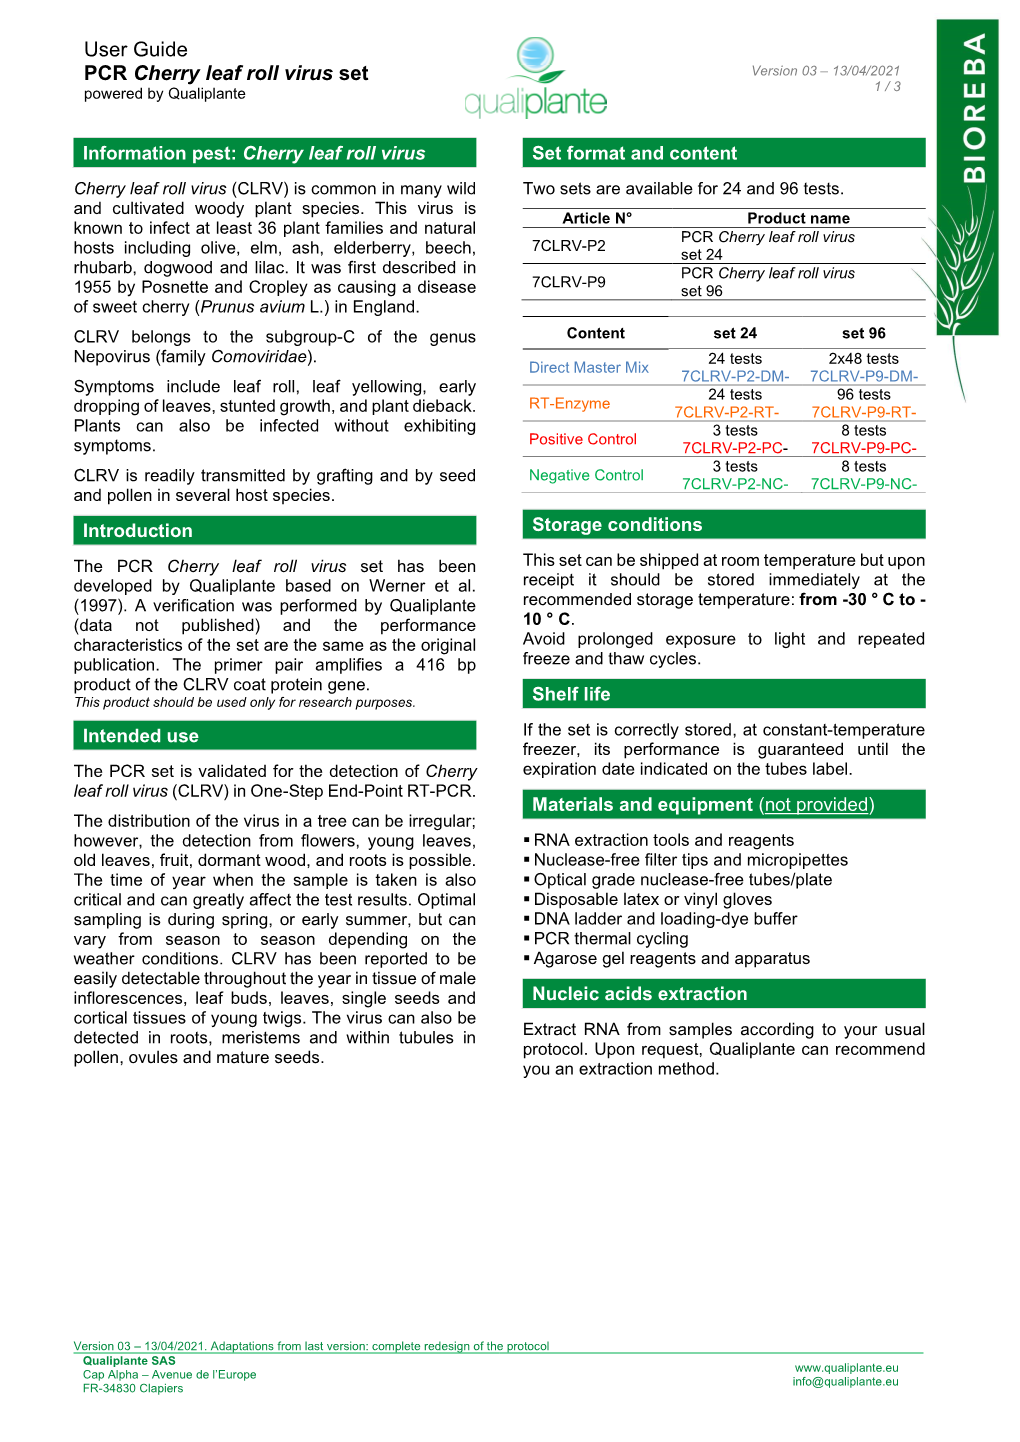 User Guide PCR Cherry Leaf Roll Virus Set Version 03 – 13/04/2021 Powered by Qualiplante 1 / 3